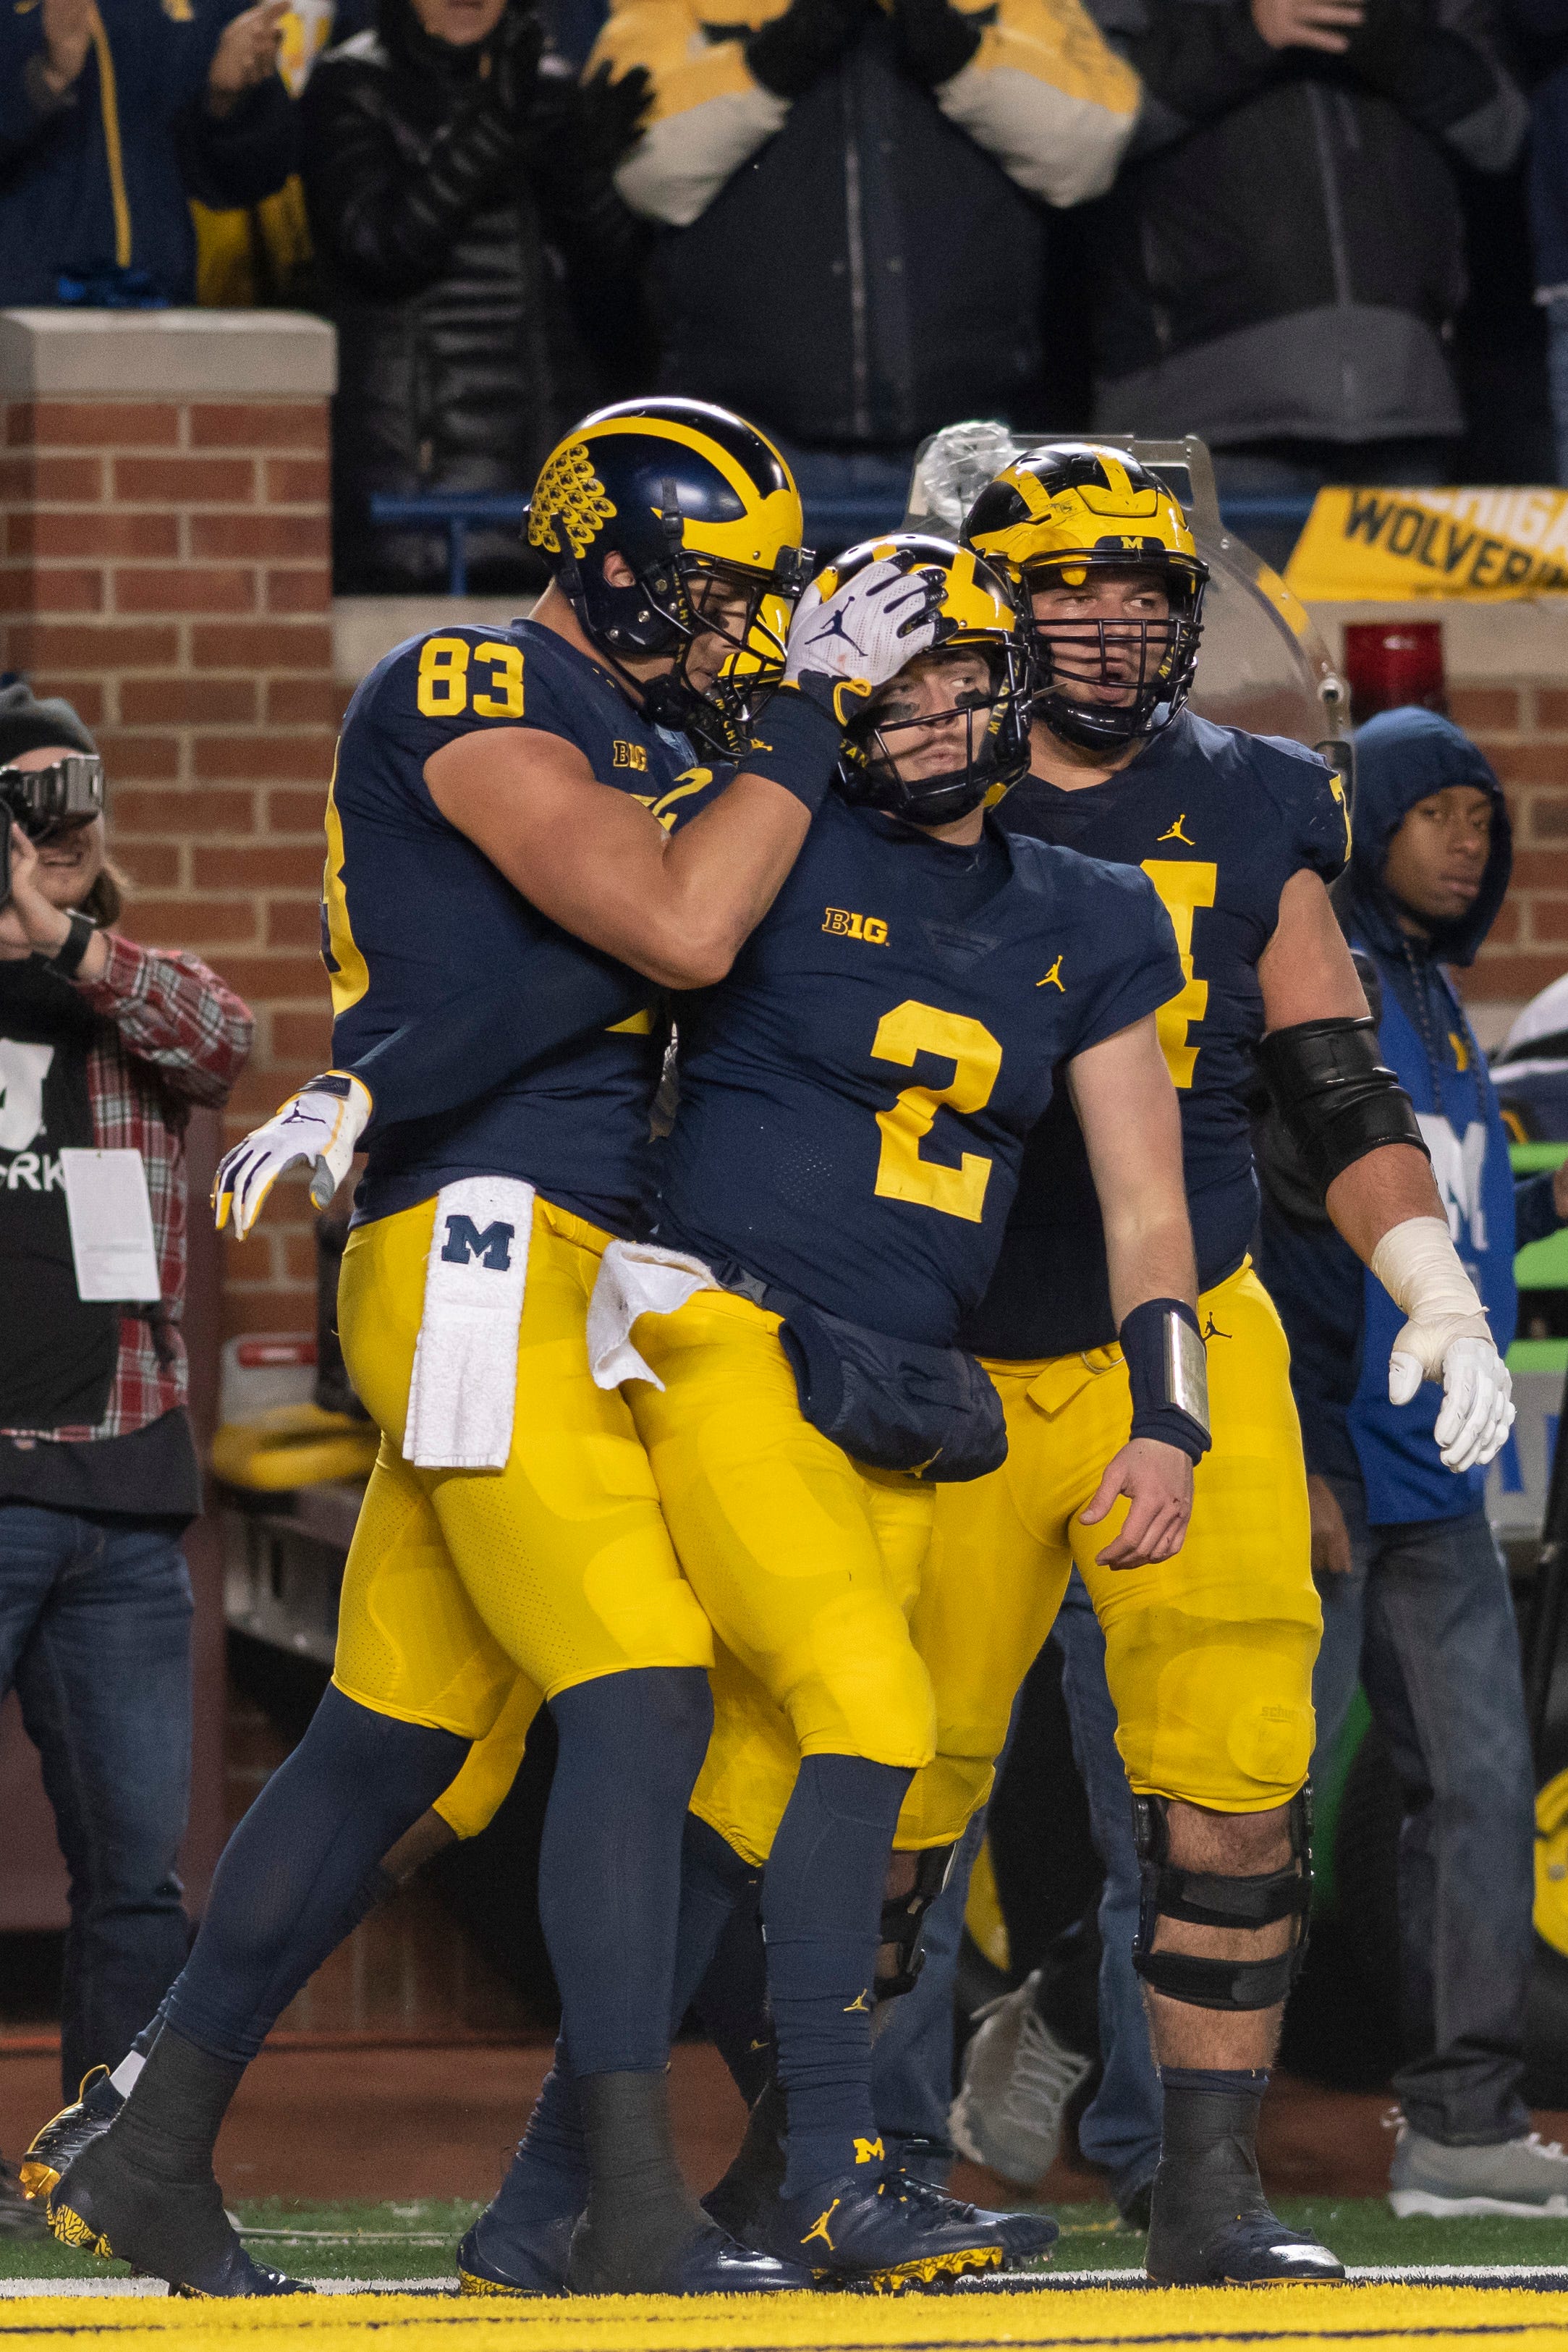 Michigan tight end Zach Gentry, quarterback Shea Patterson and offensive lineman Ben Bredeson celebrate after Patterson ran for a touchdown in the third quarter against Wisconsin.